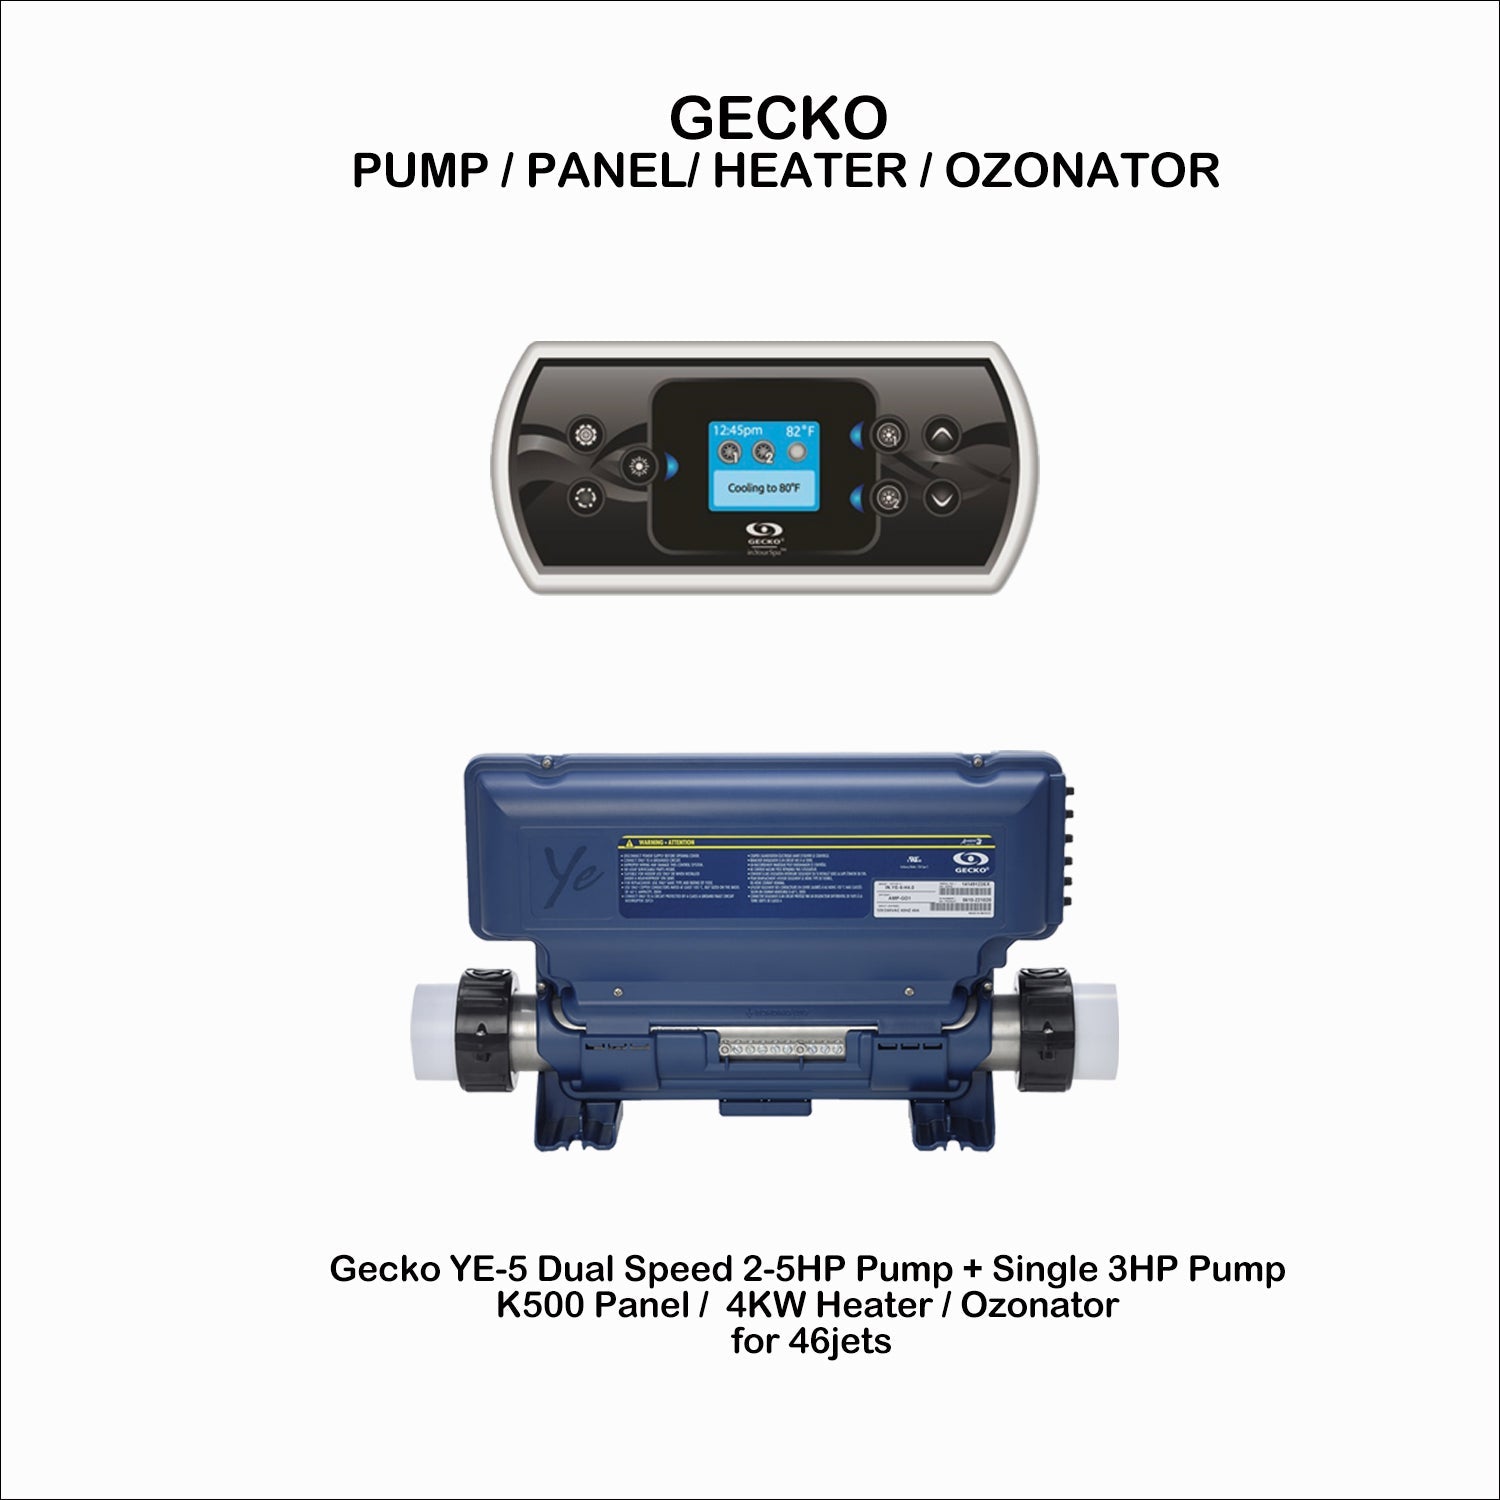 Made in US control panel and pump. Ultra strong pump in the luxurious model, includes 46 jets and ozonator, total of 2 pumps